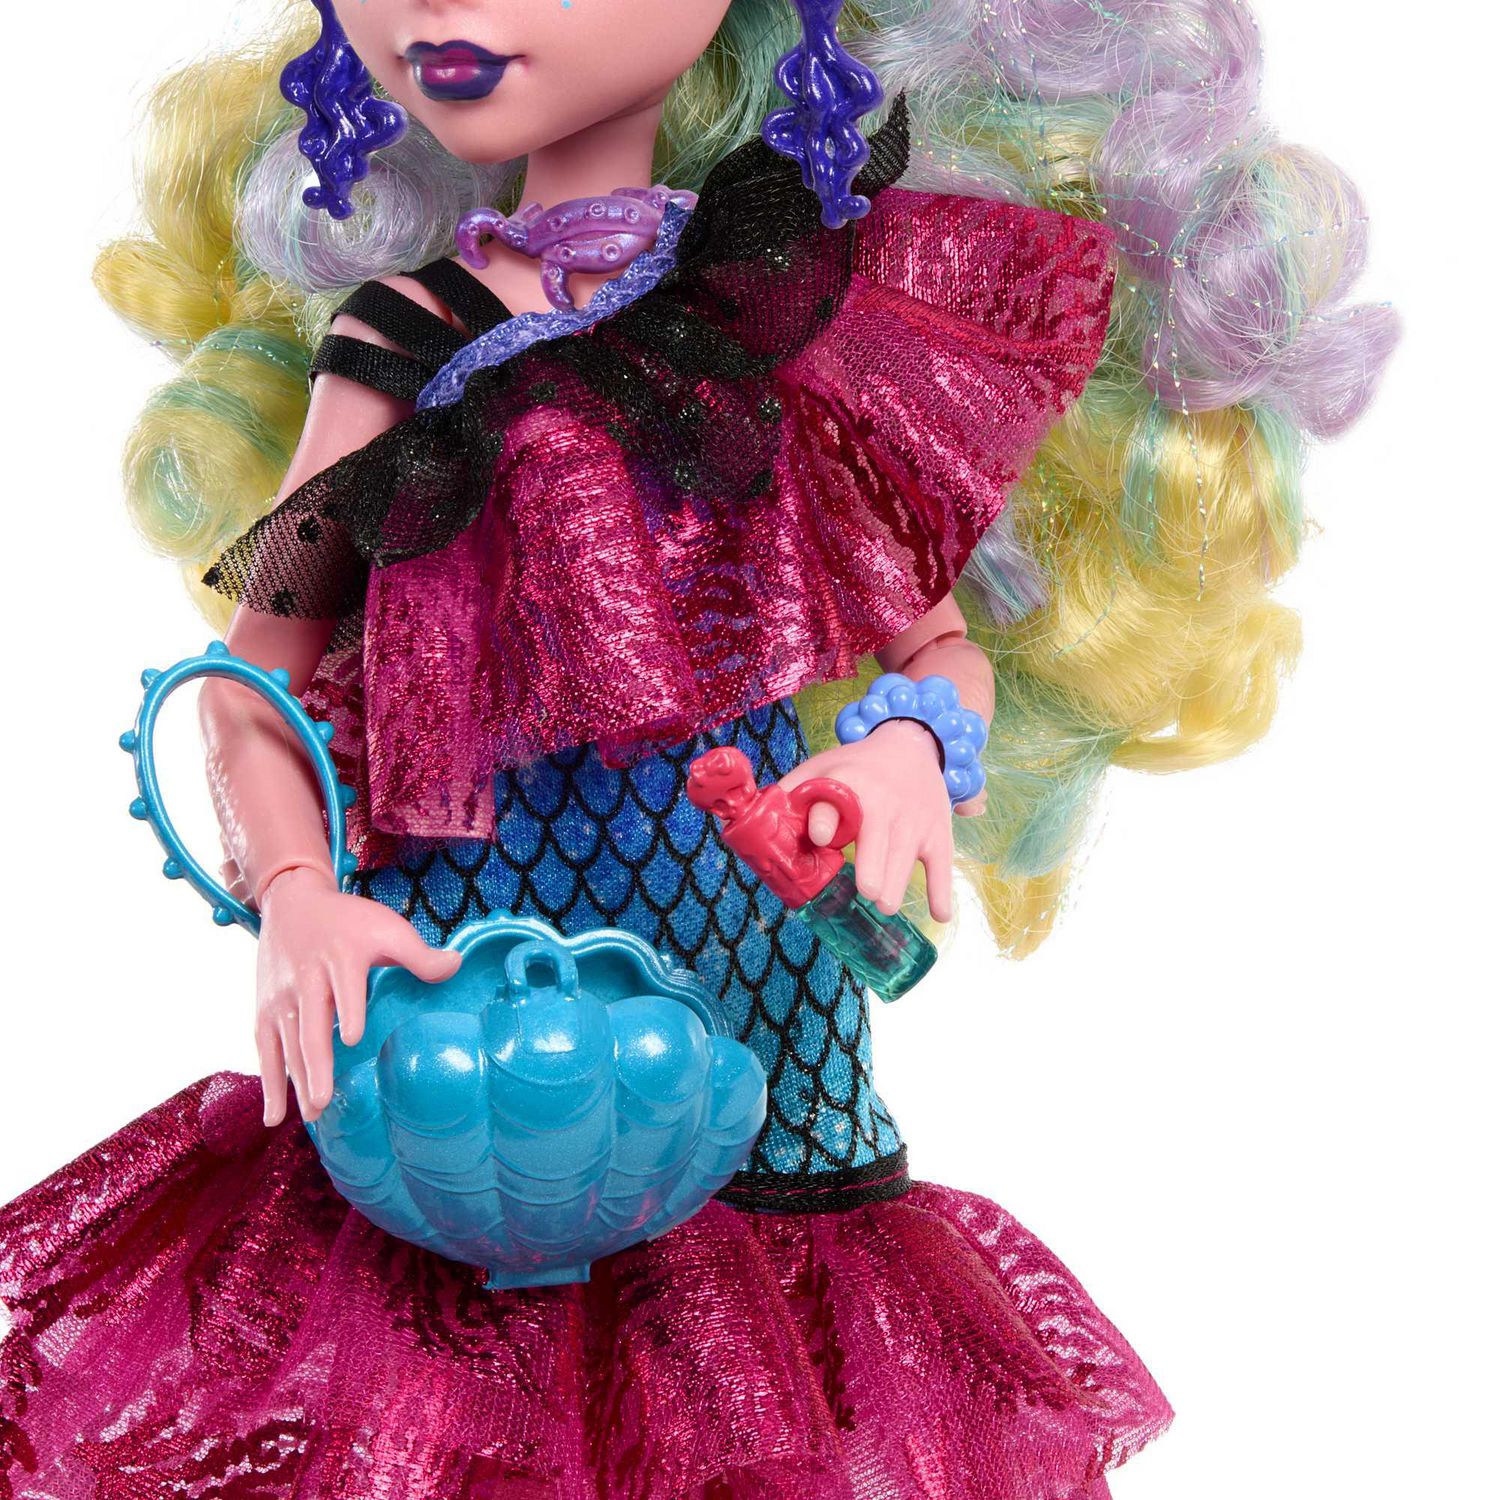 Monster High Lagoona Blue Doll in Monster Ball Party Dress with